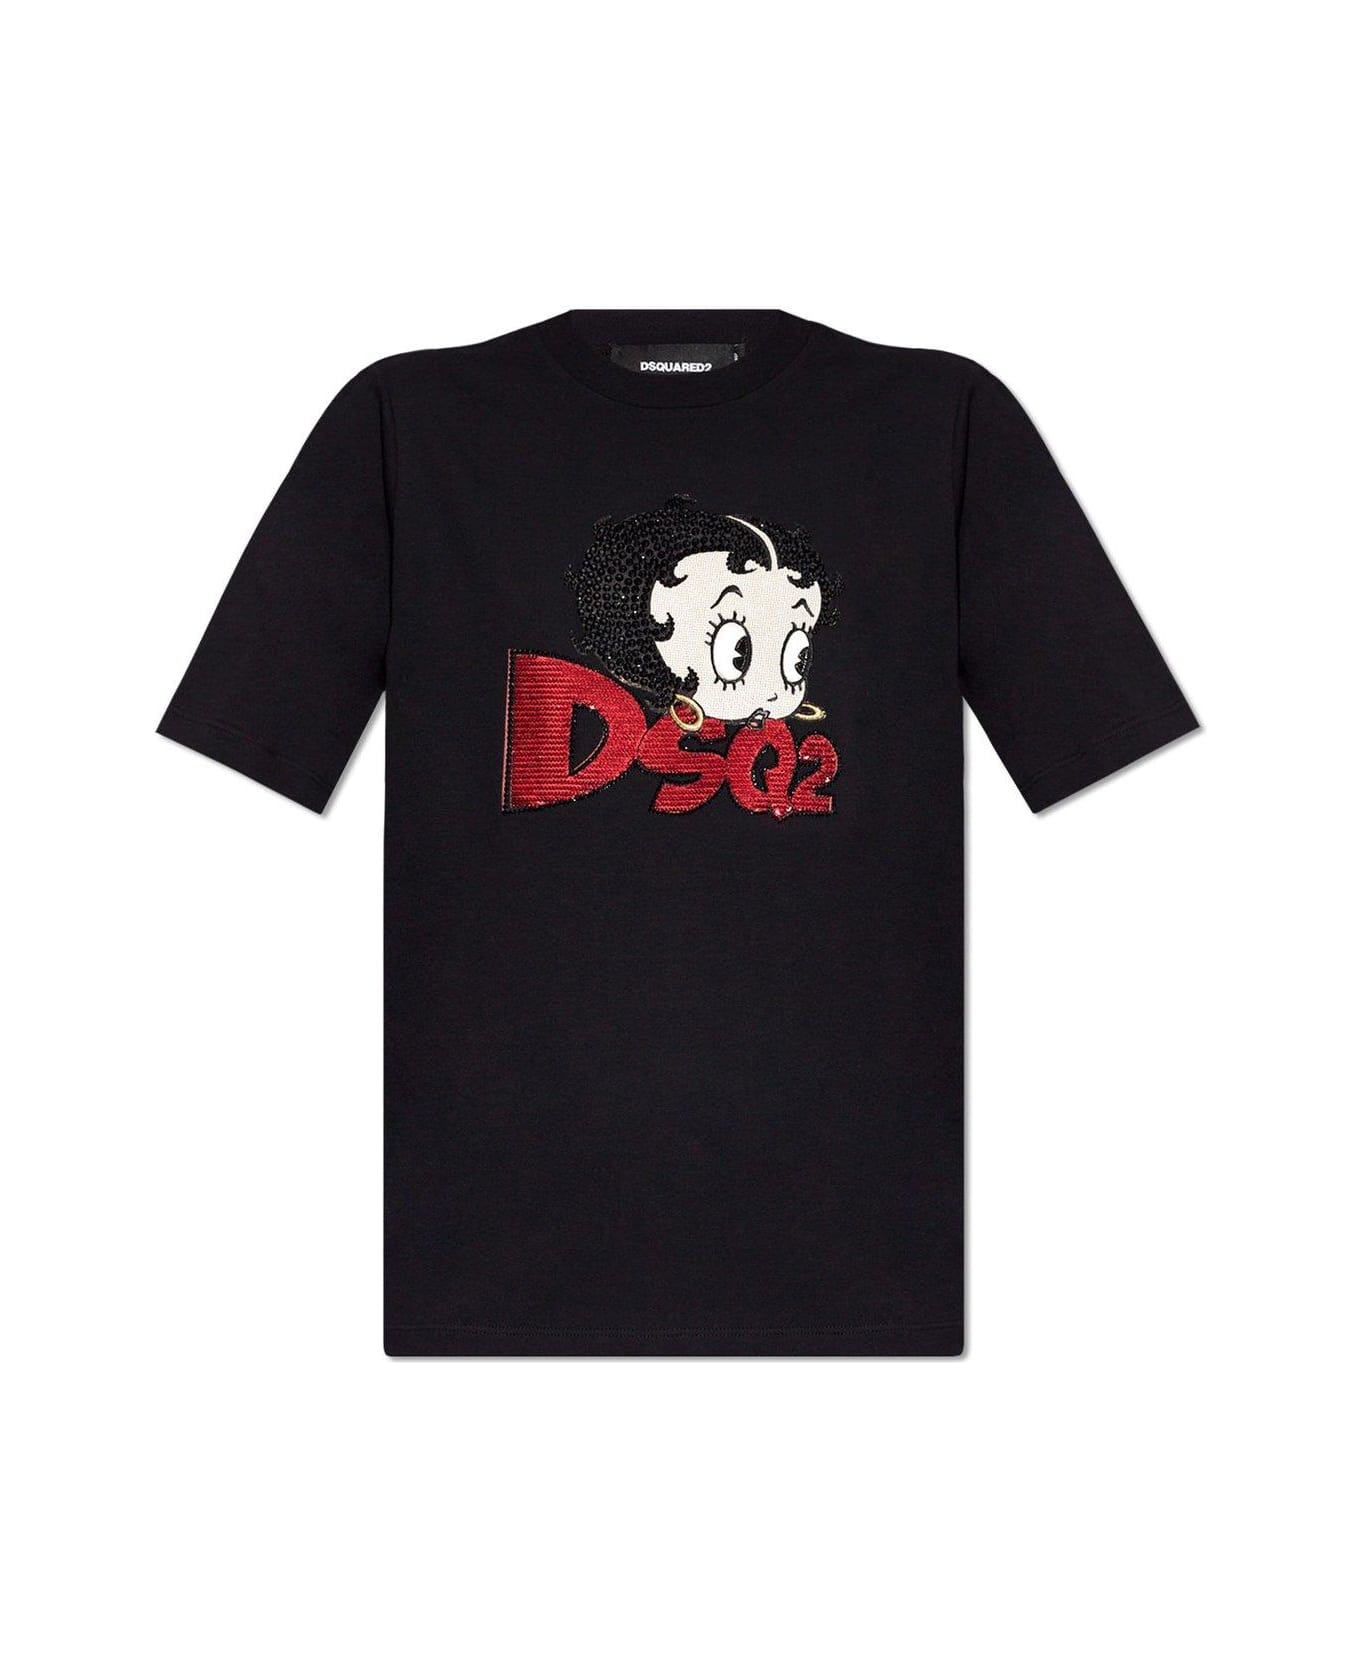 Dsquared2 X Betty Boop Sequin Embellished T-shirt - Black